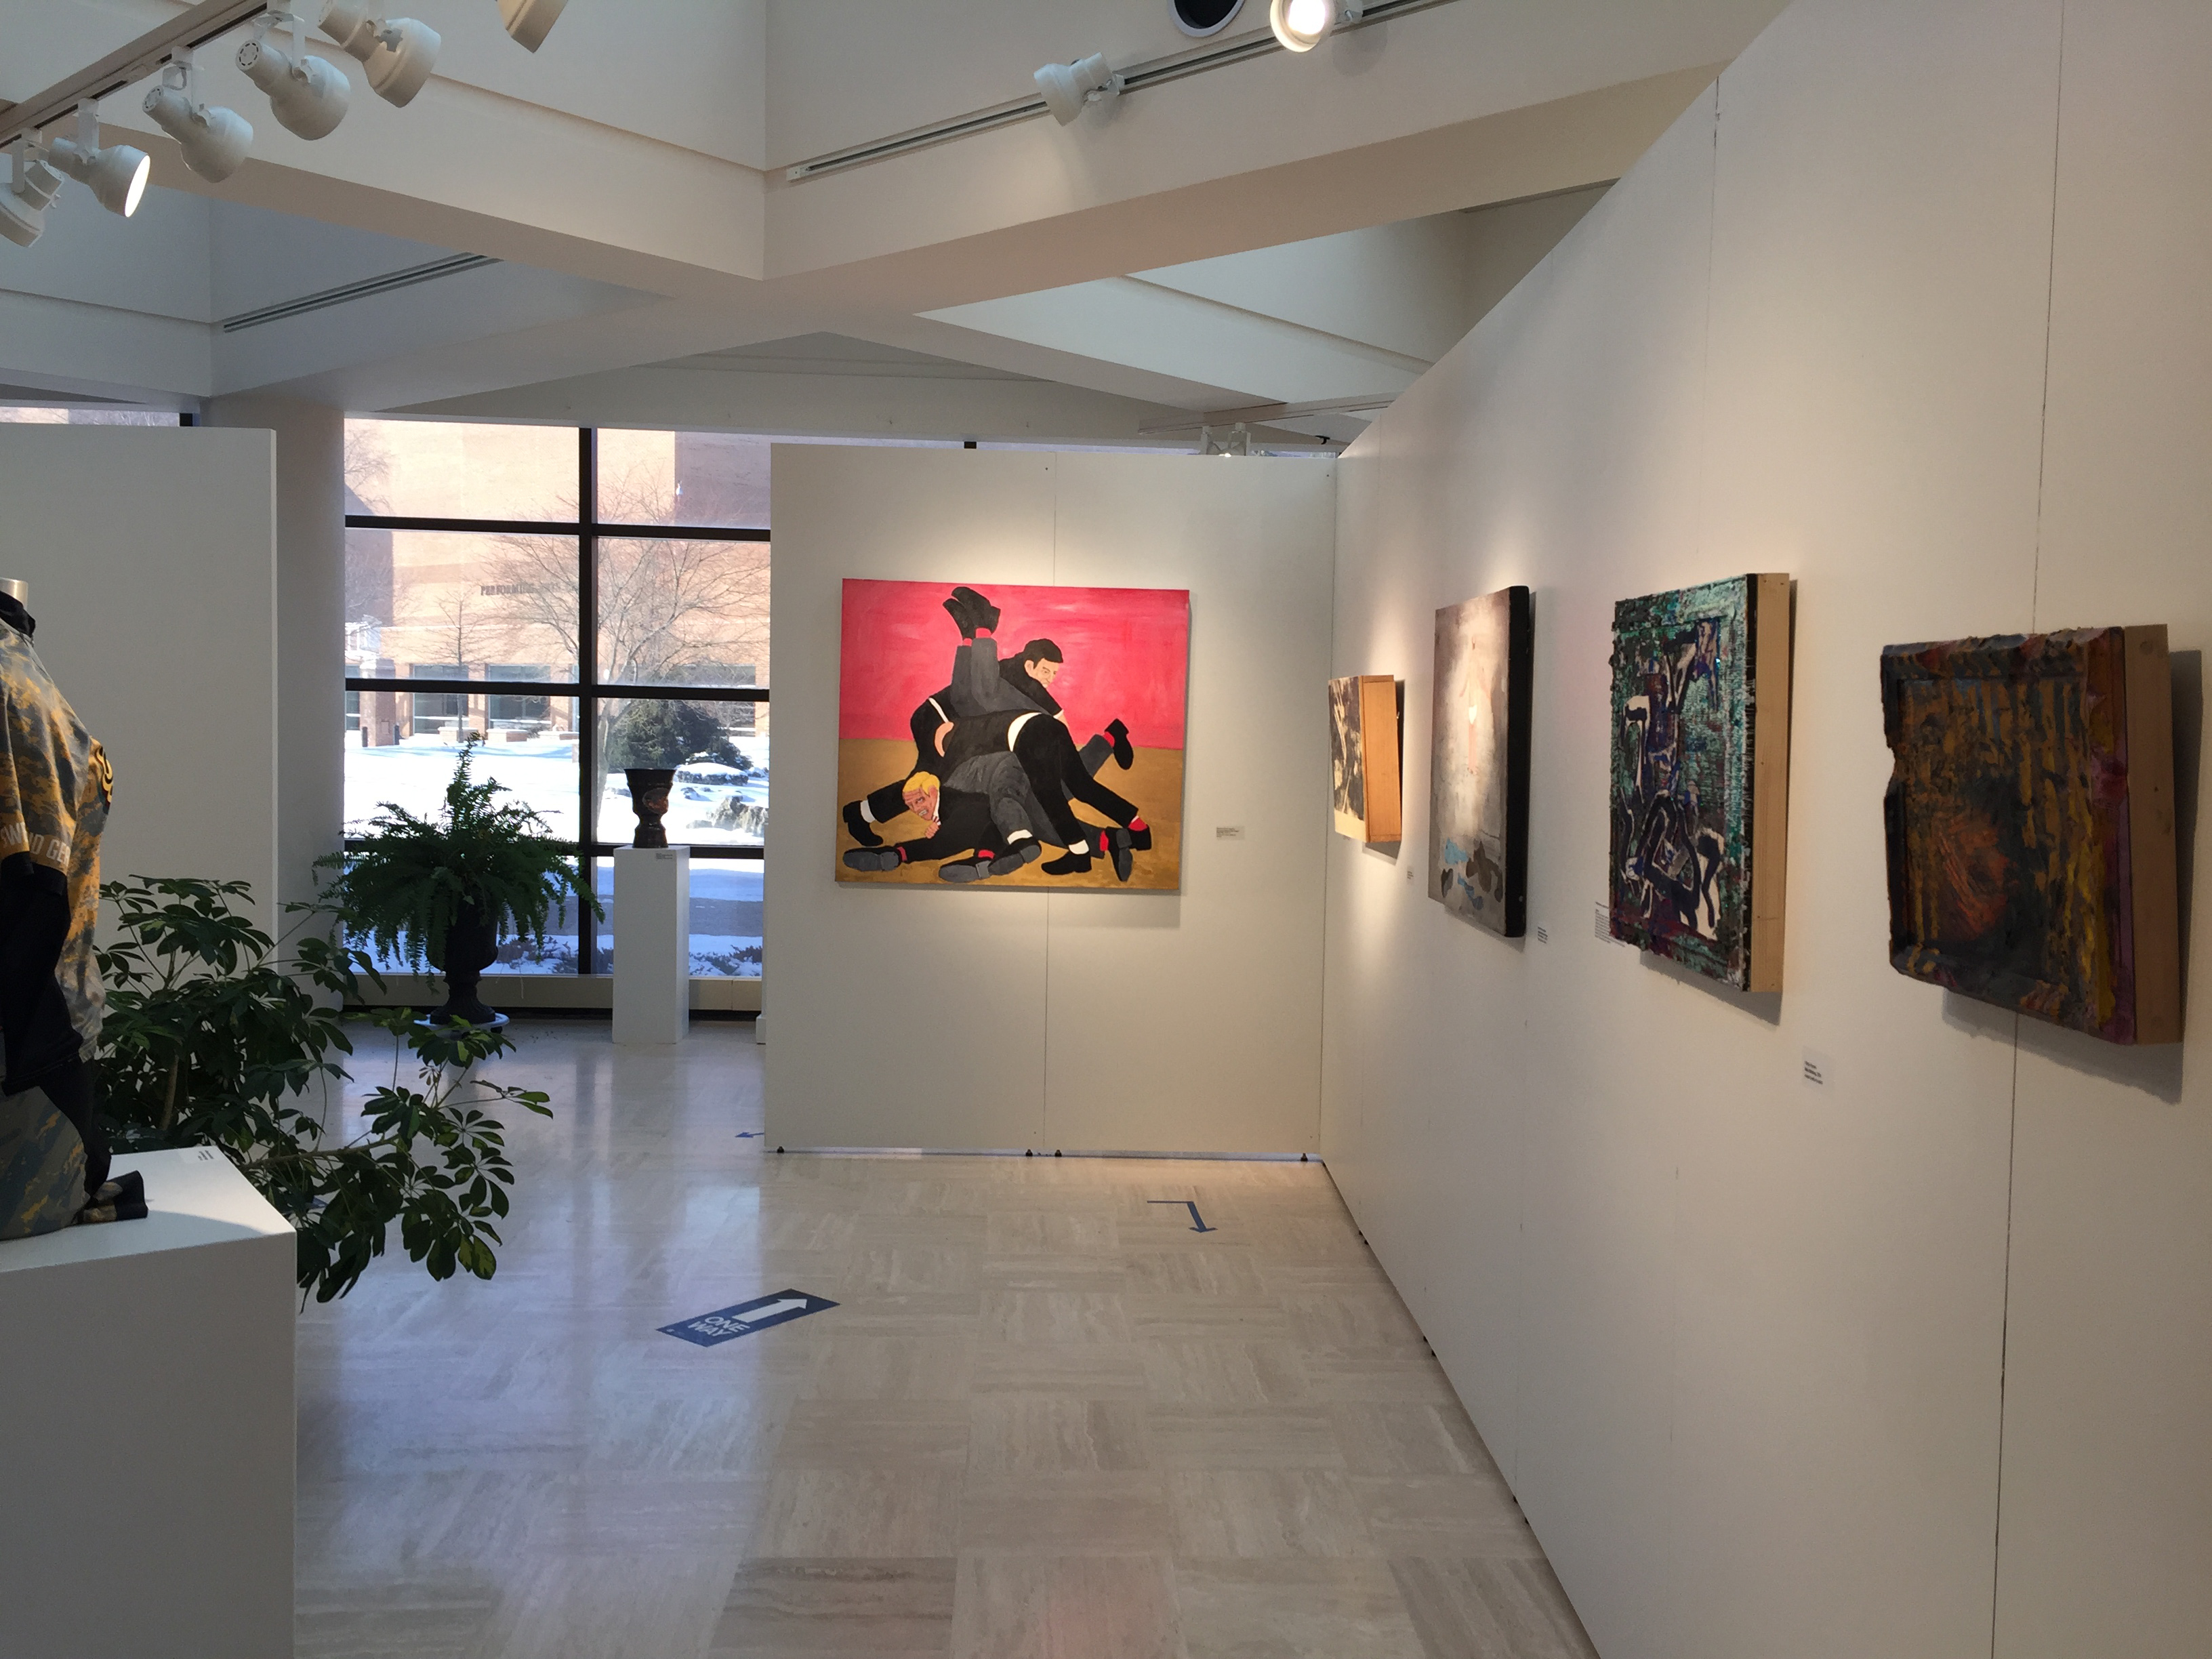 Installation view looking toward outside window. Work featured Canale, Clark, Garguilo, Hanson